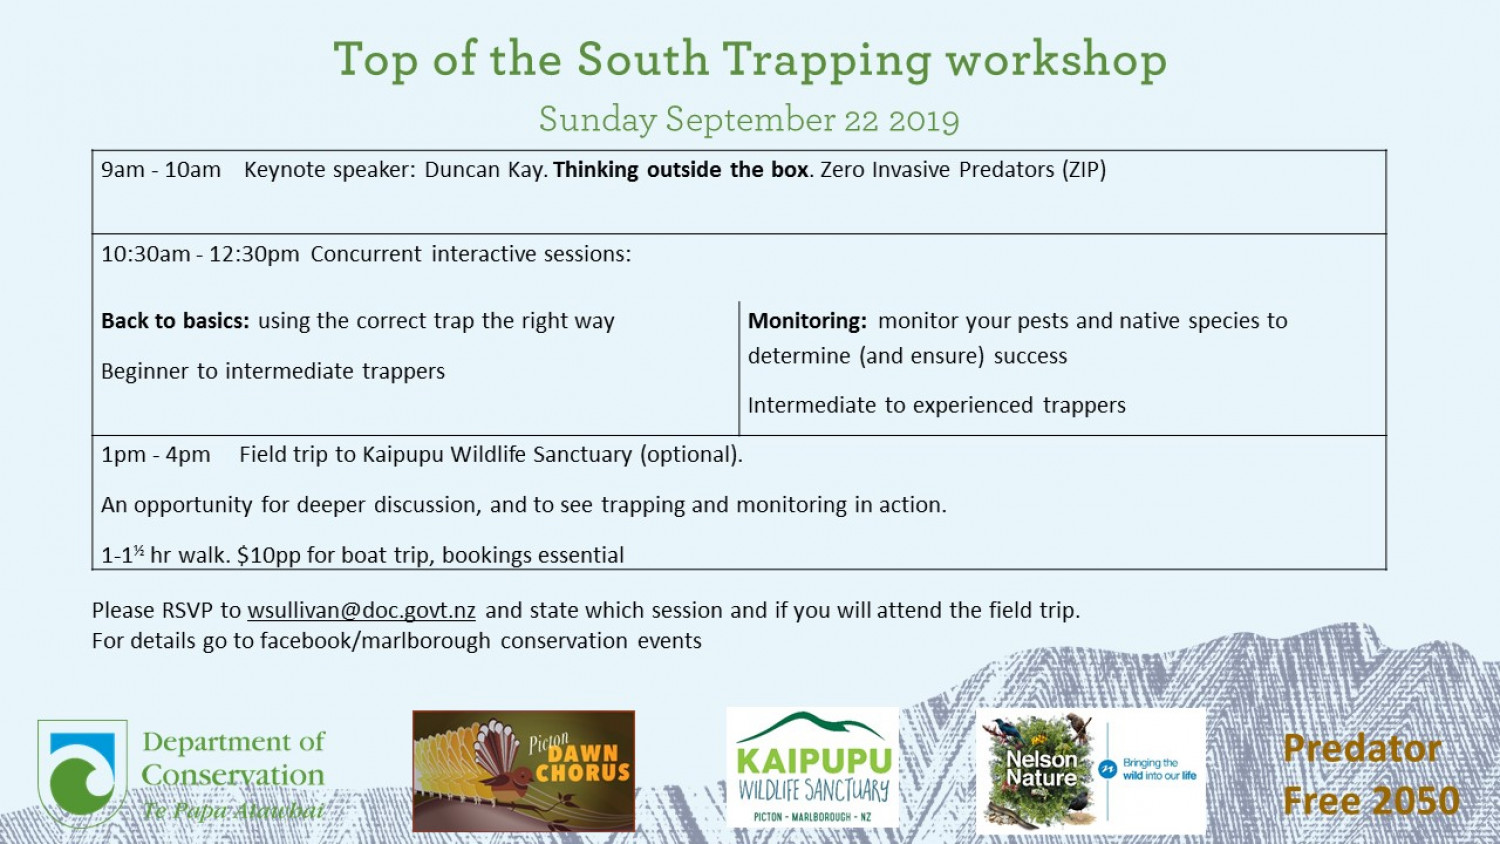 Top of the South Trapping workshop